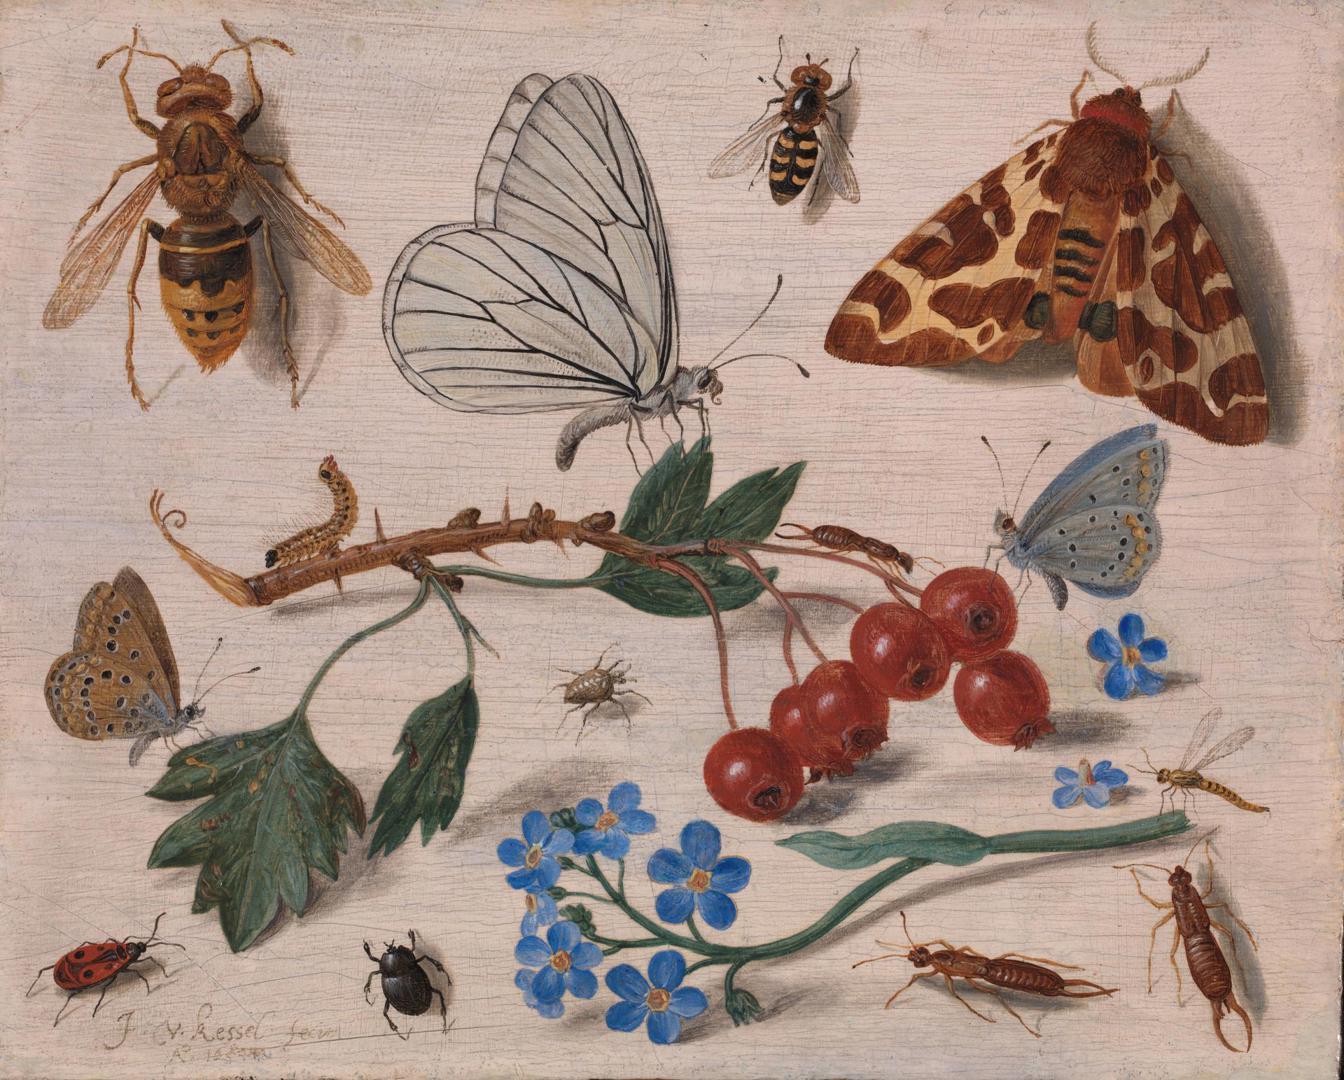 Insects with Common Hawthorn and Forget-Me-Not by Jan van Kessel the Elder